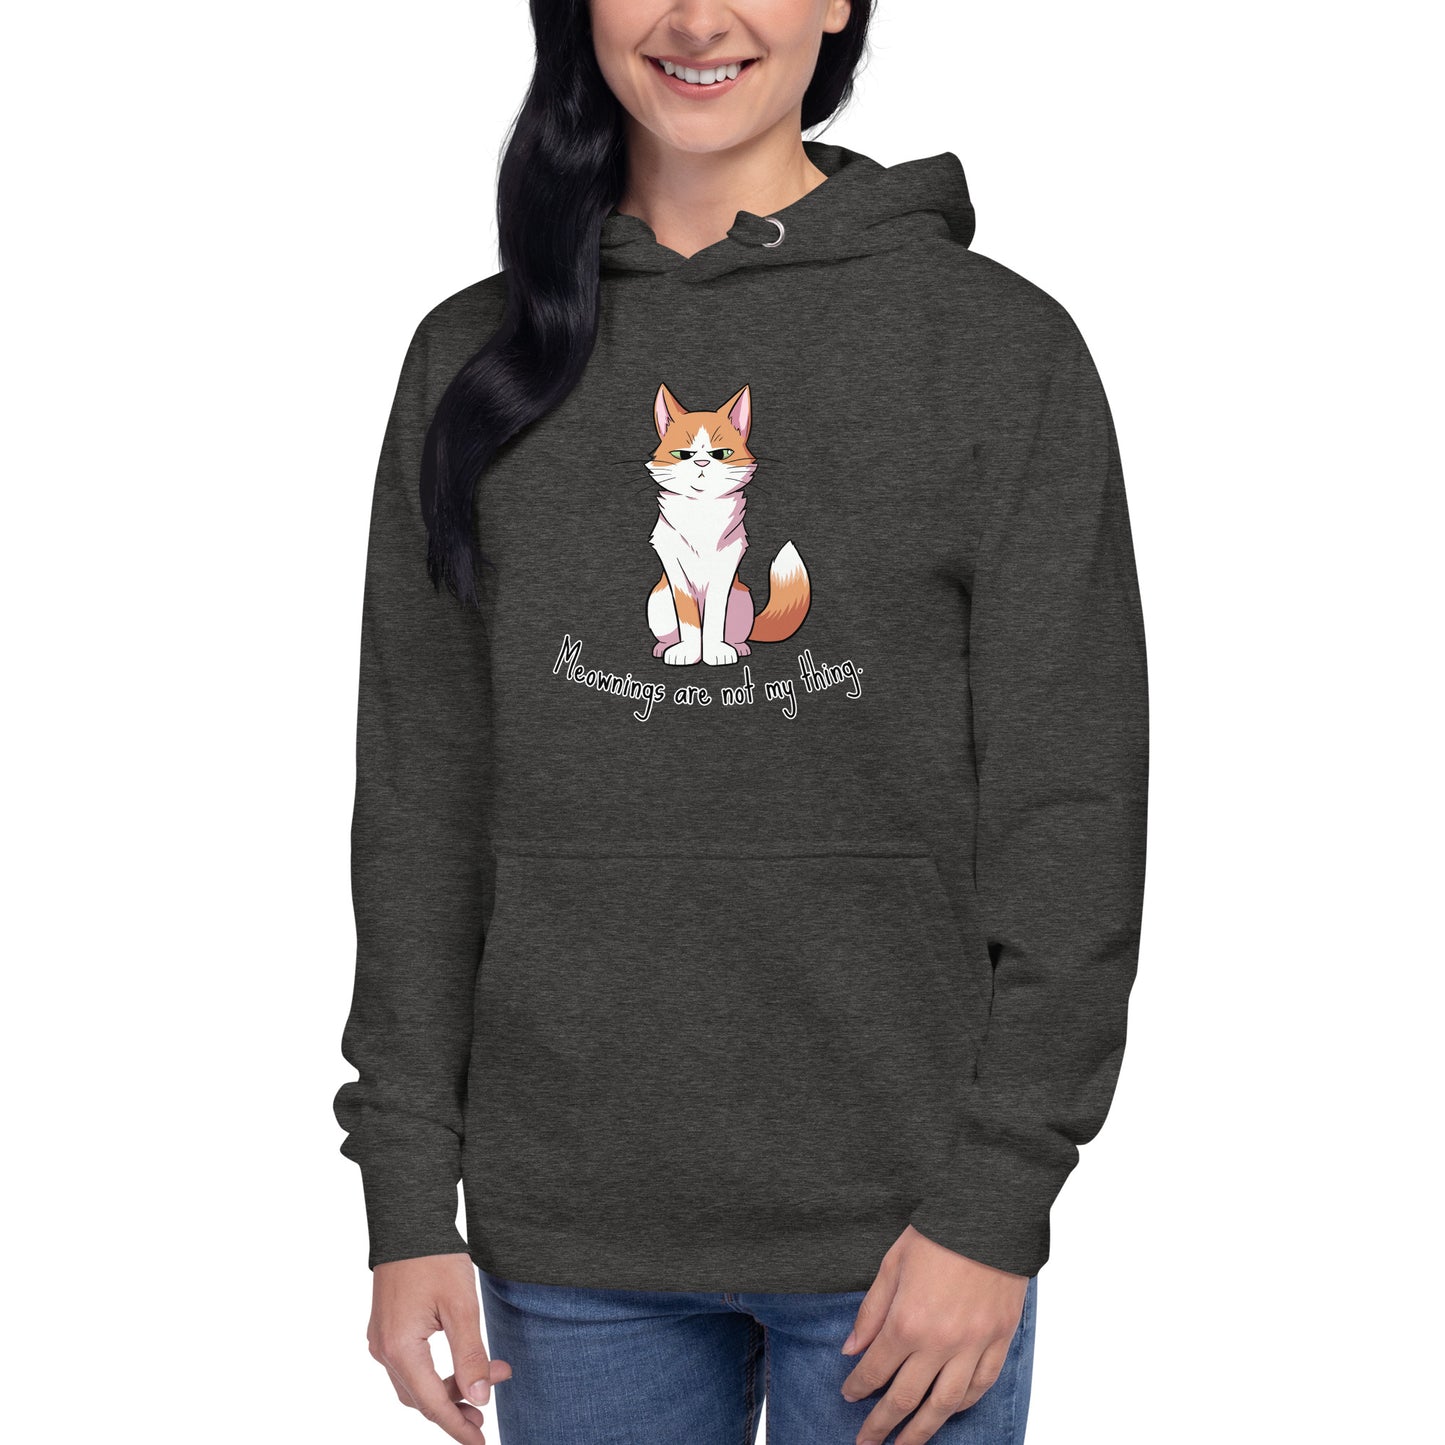 Ginger - Meowings are not my thing Unisex Hoodie